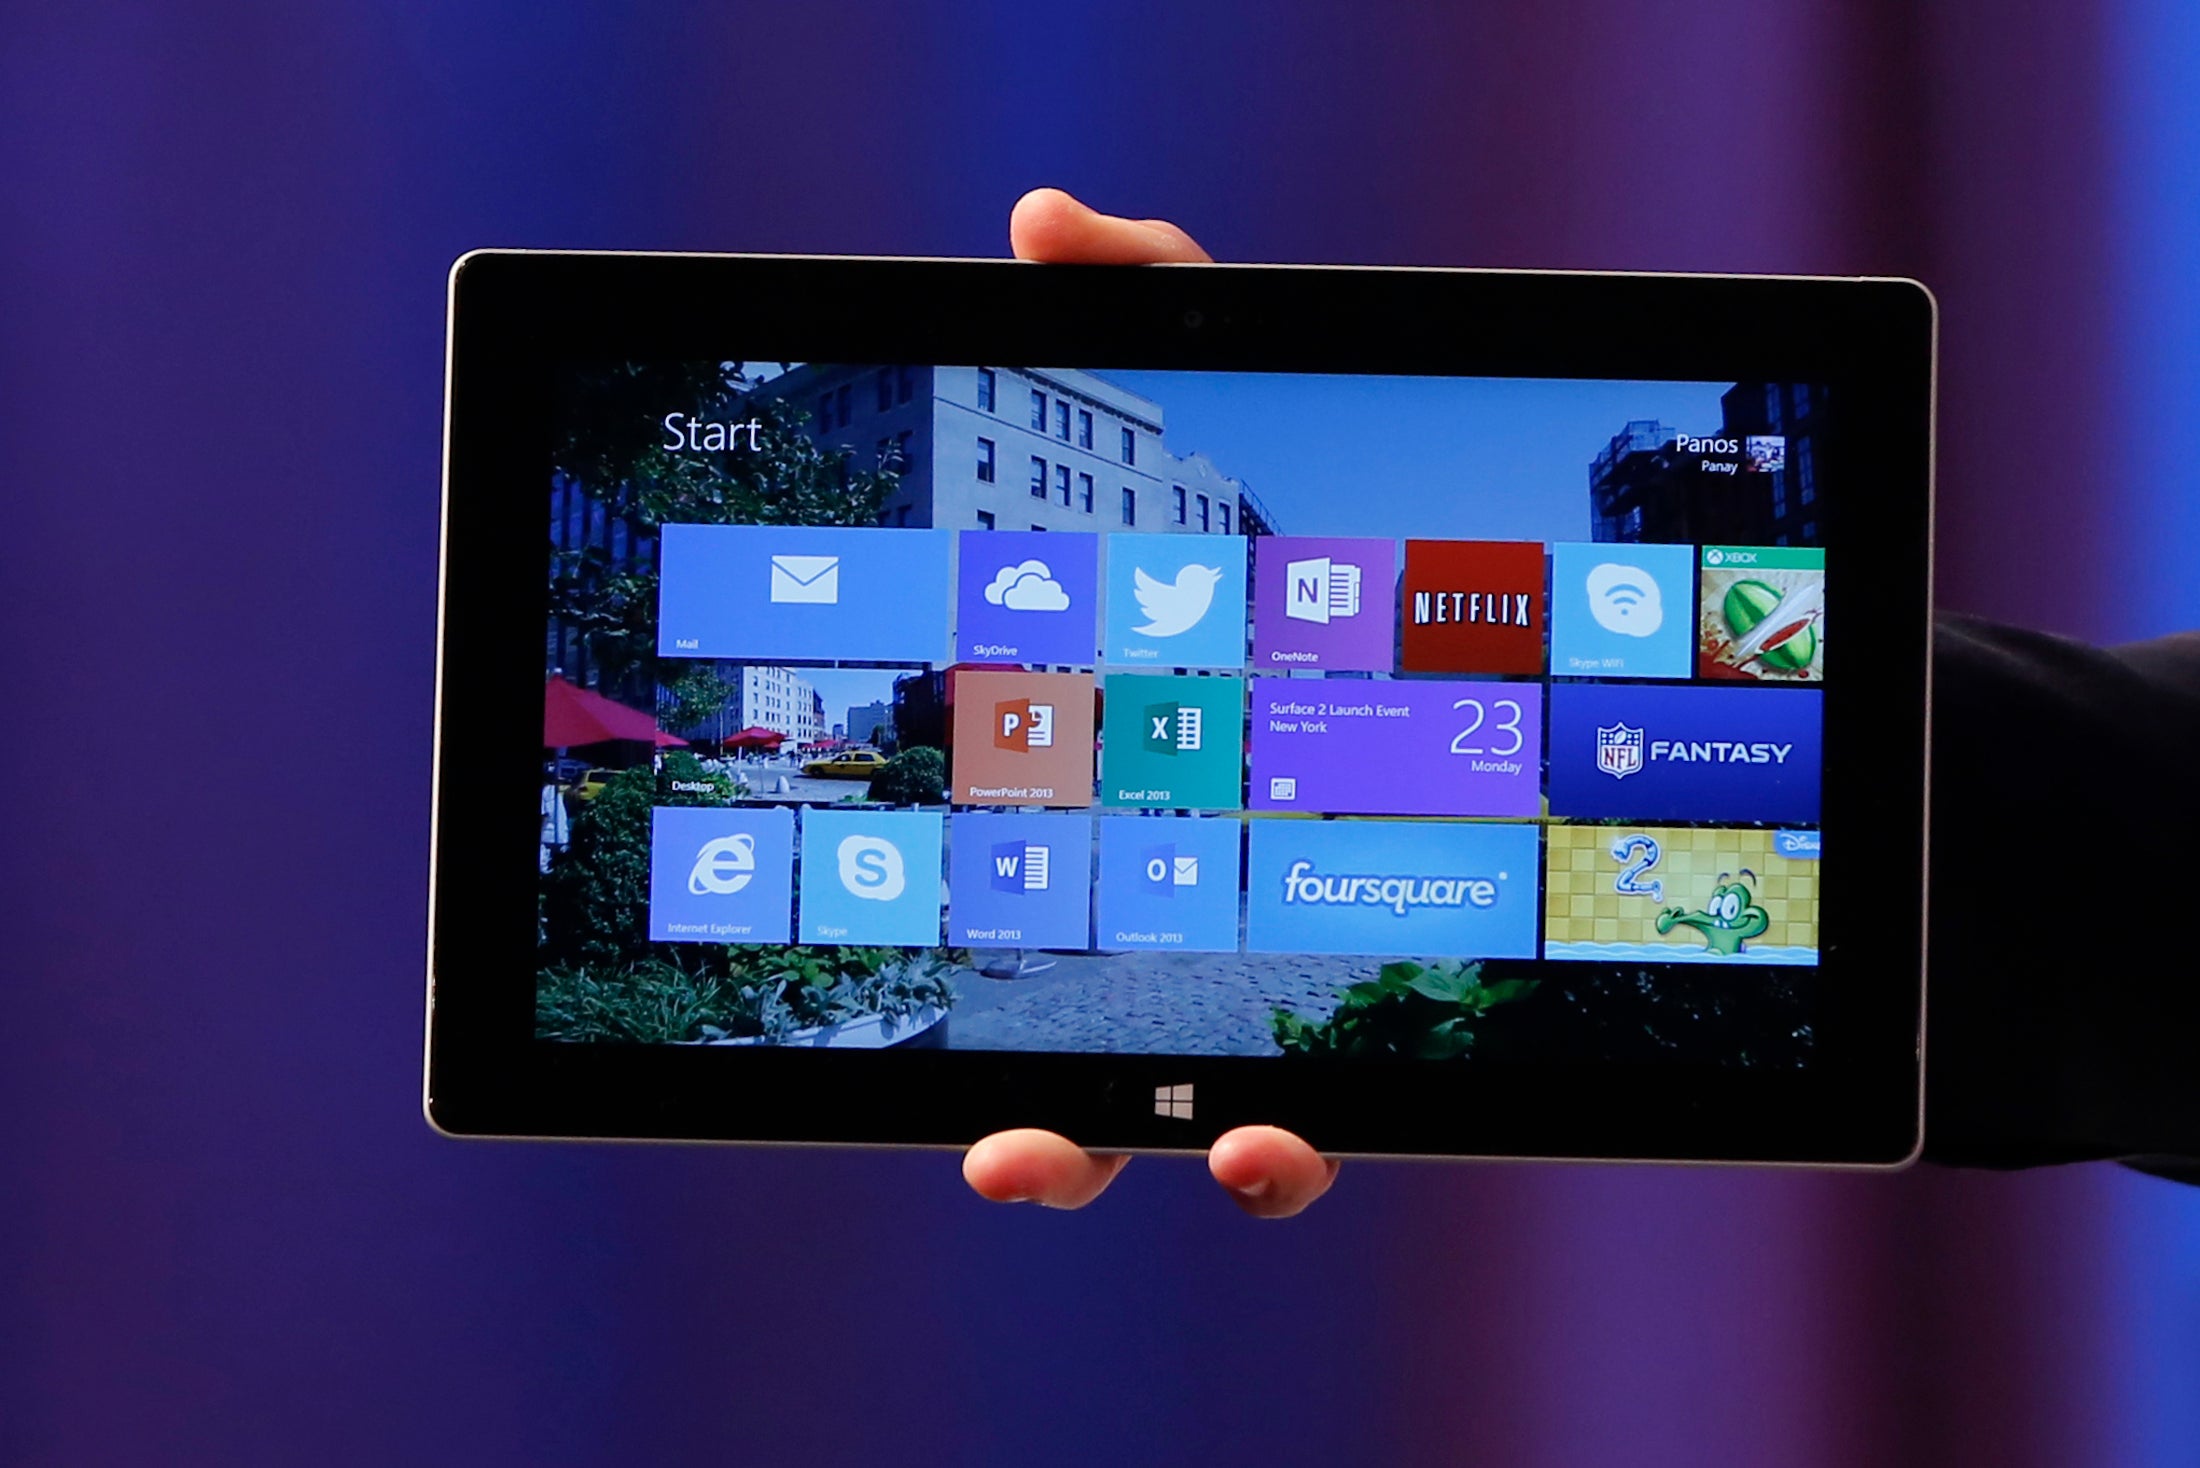 Surface 2 And Surface Pro 2 Microsoft Refreshes Its Hybrid Tablet